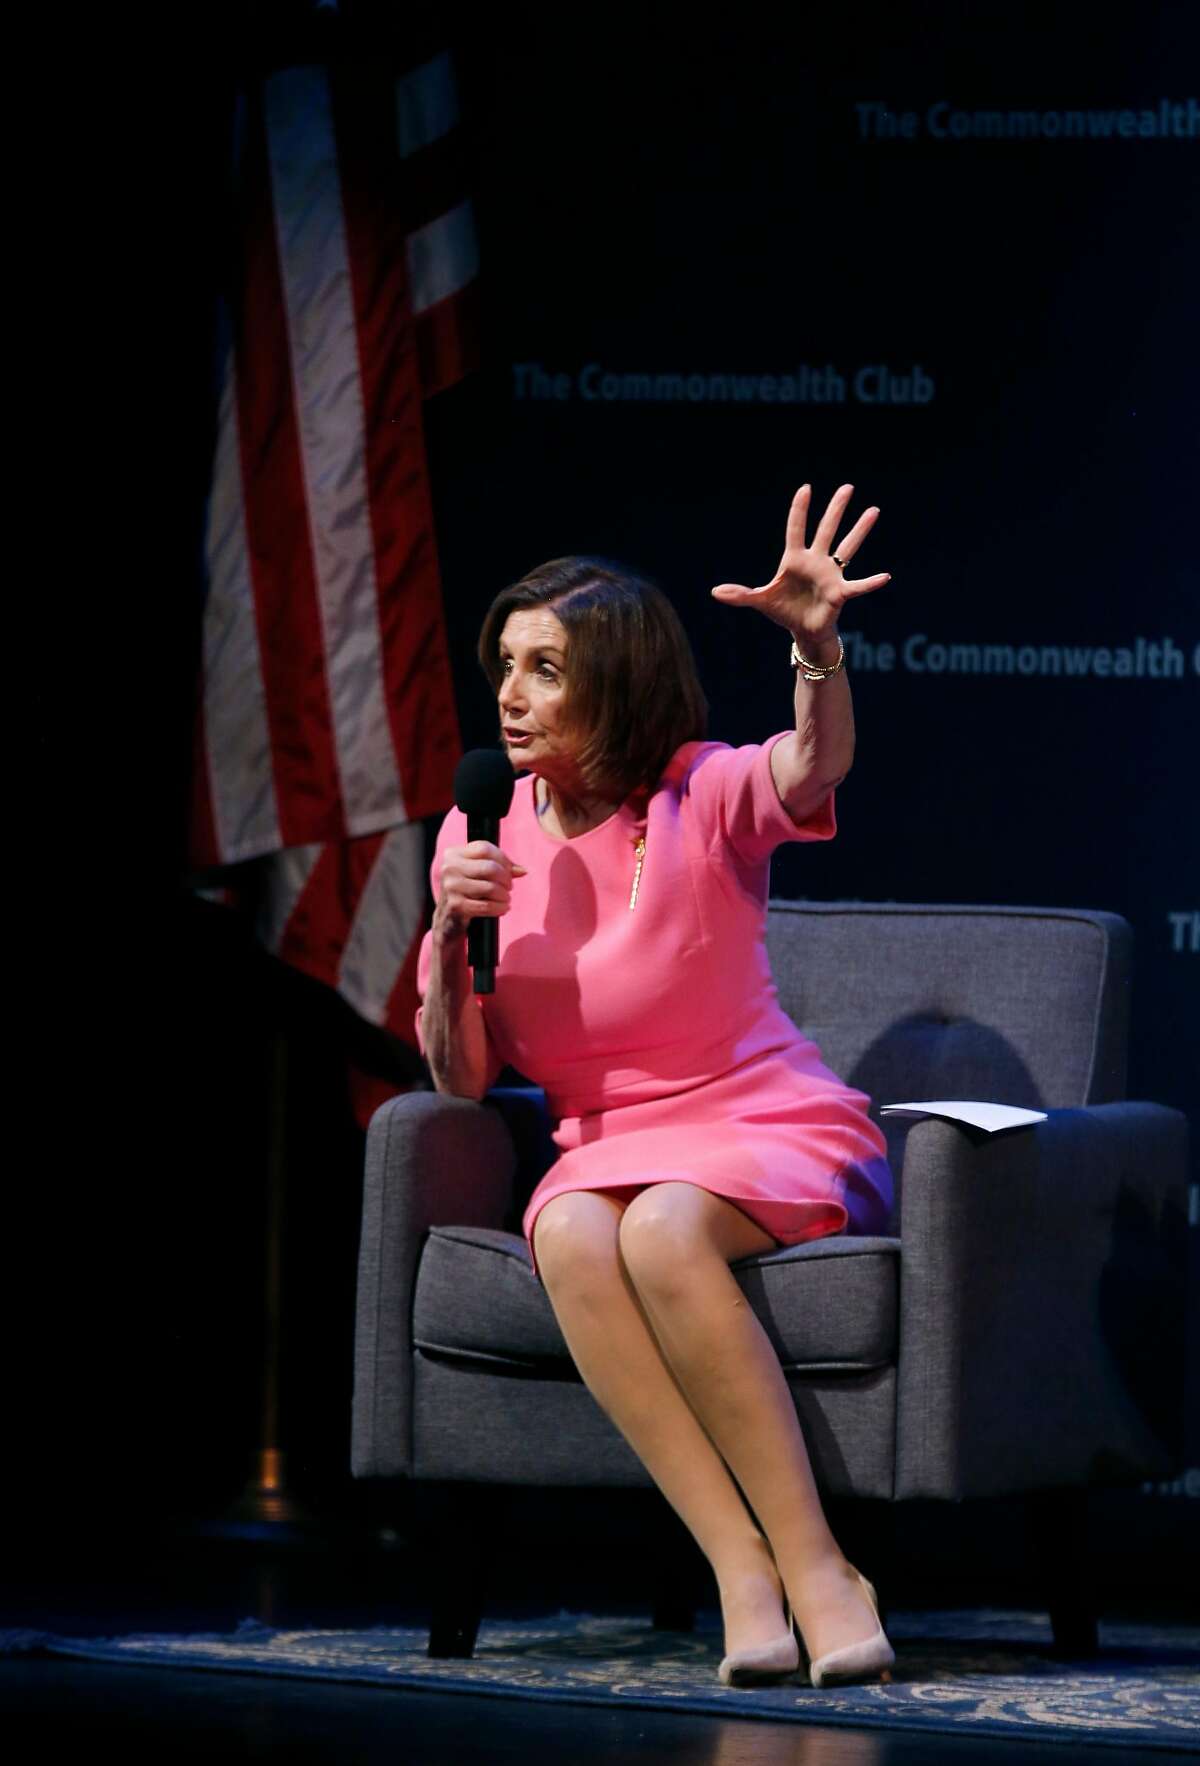 Speaker of the House Nancy Pelosi has a conversation with Dr. Gloria Duffy, president and CEO of the Commonwealth Club, at the Marines' Memorial Theatre in San Francisco, Calif. on Wednesday, May 29, 2019.